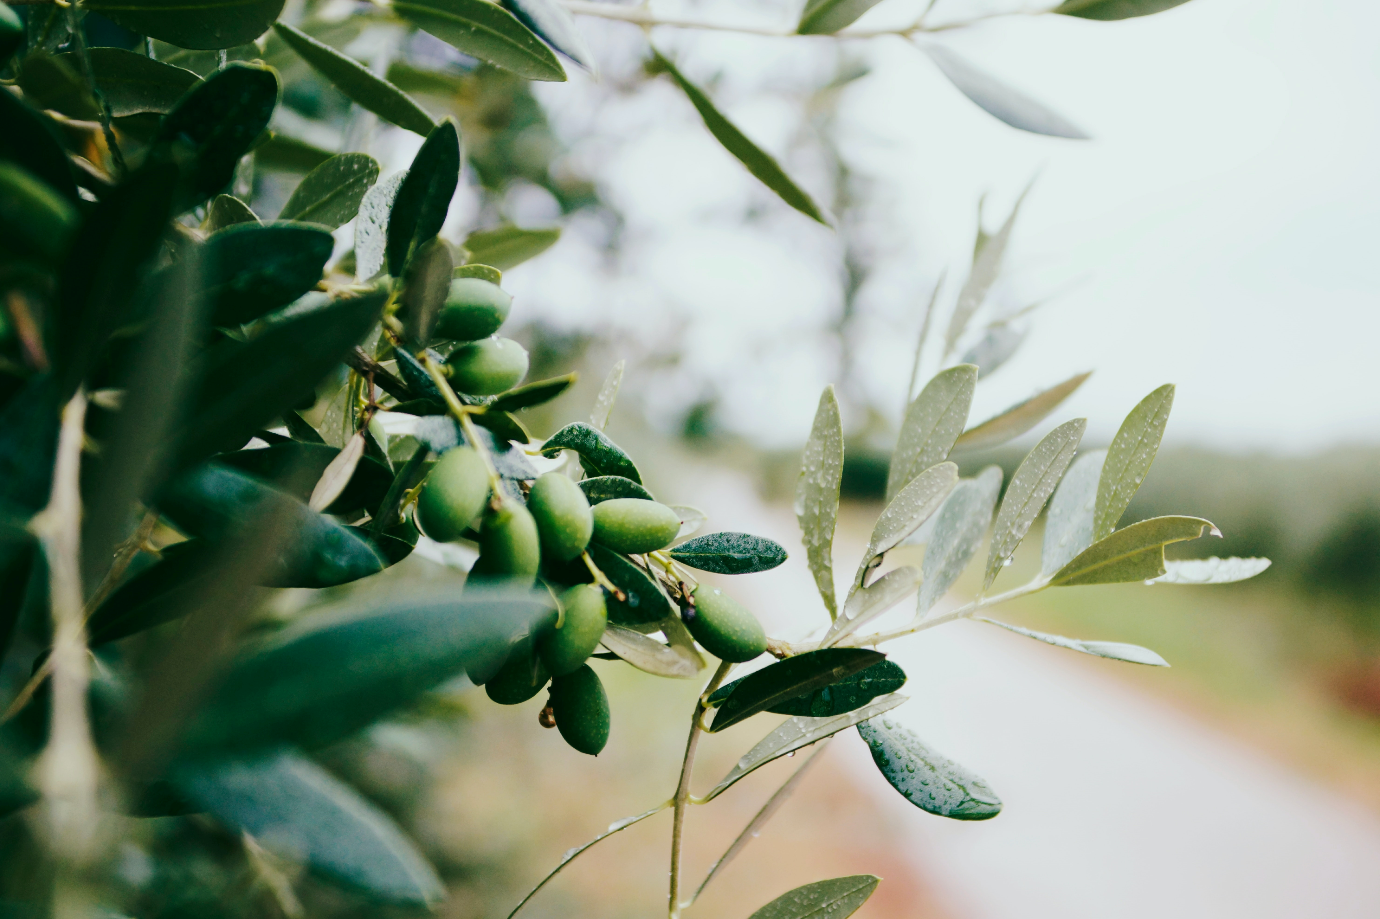 Superfood Spotlight: Why Olive Oil Might Be Our Favorite Kitchen Staple